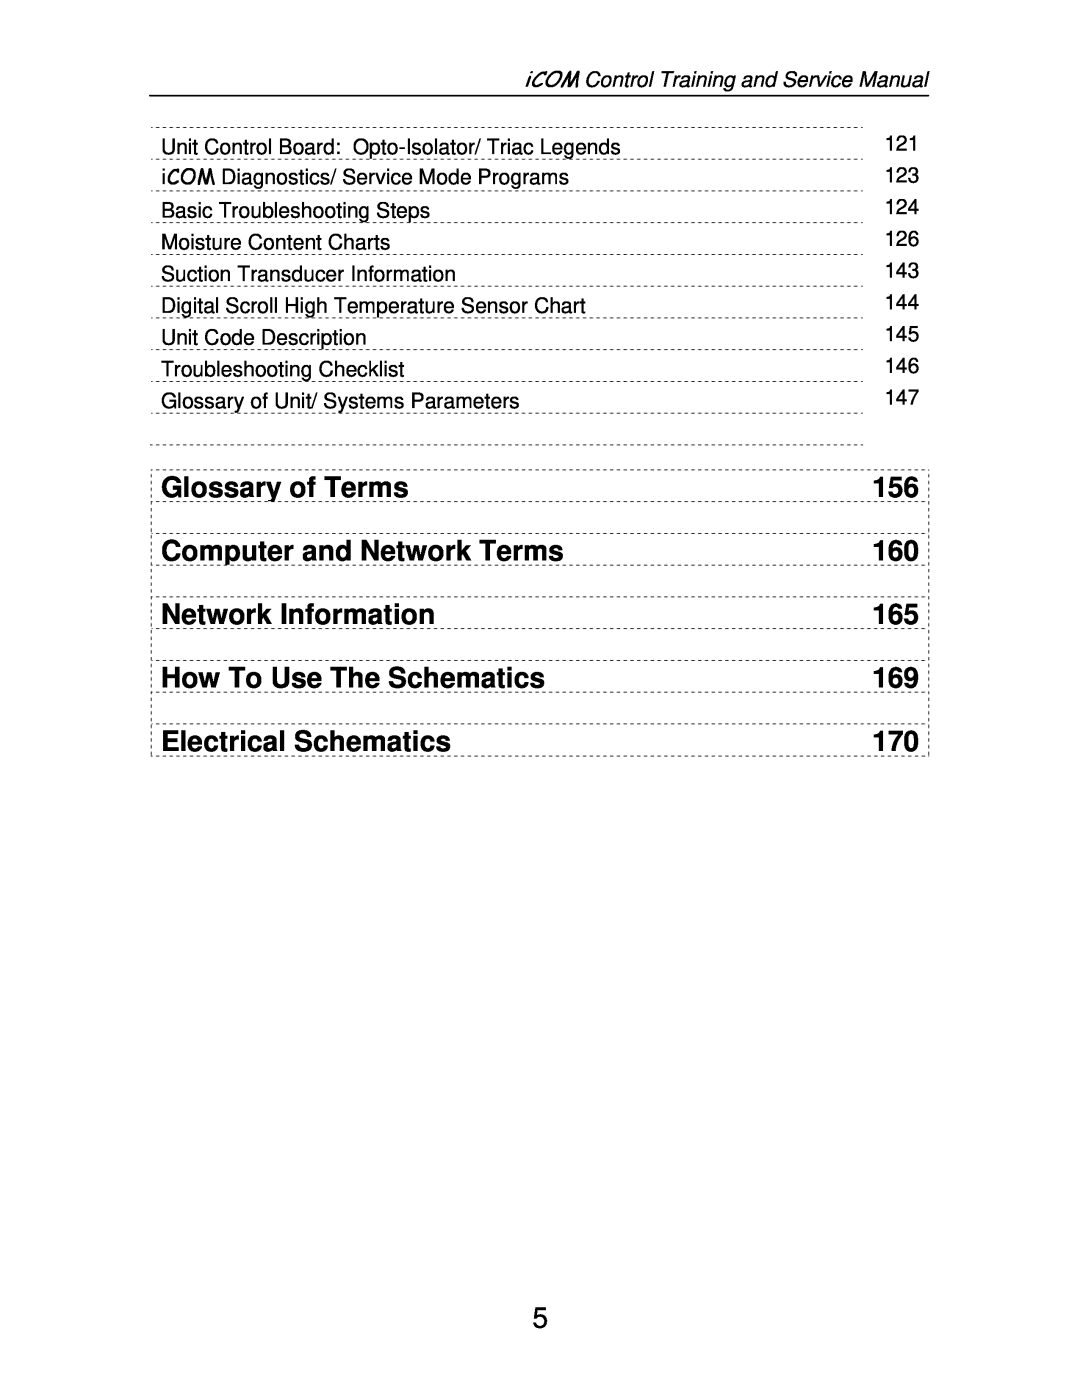 Liebert TM-10098 Glossary of Terms, Computer and Network Terms, Network Information, How To Use The Schematics 